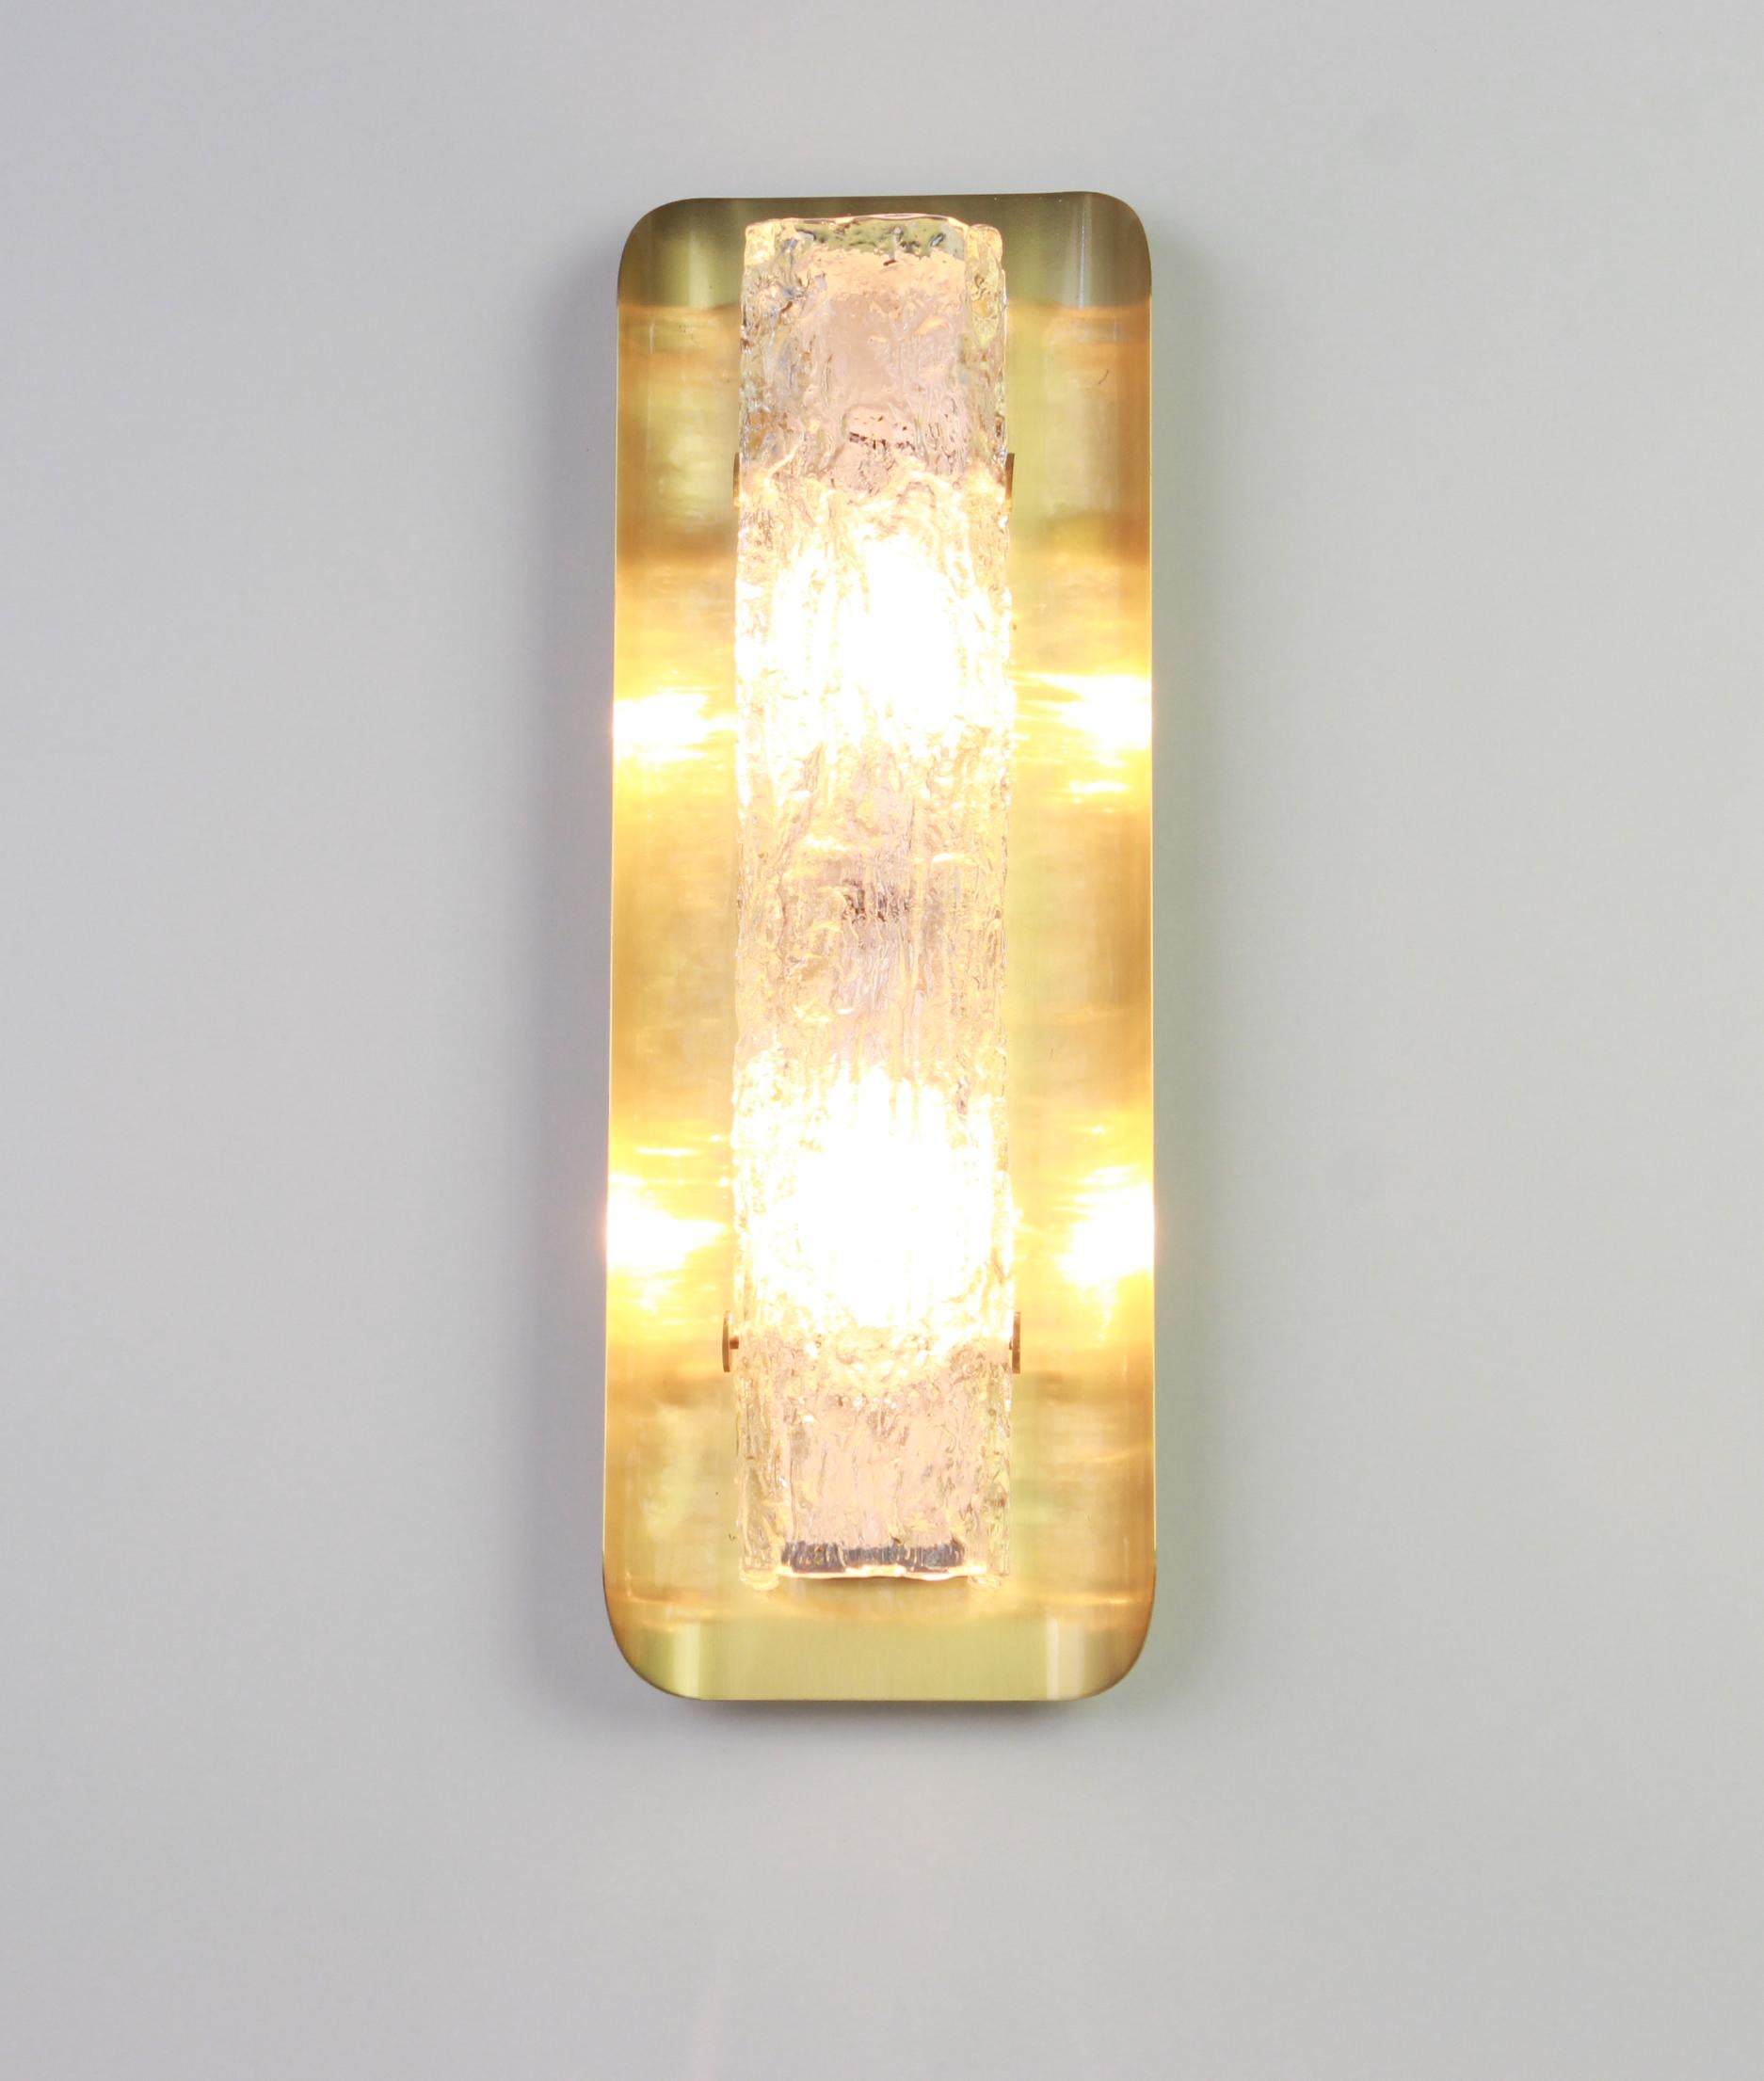 Gorgeous glass sconces with brass holders by Hillebrand Leuchten, Germany, circa 1970s.
High quality and in very good condition. Cleaned, well-wired and ready to use.
The sconce requires 2 x E14 standard bulbs with 40W max each and compatible with